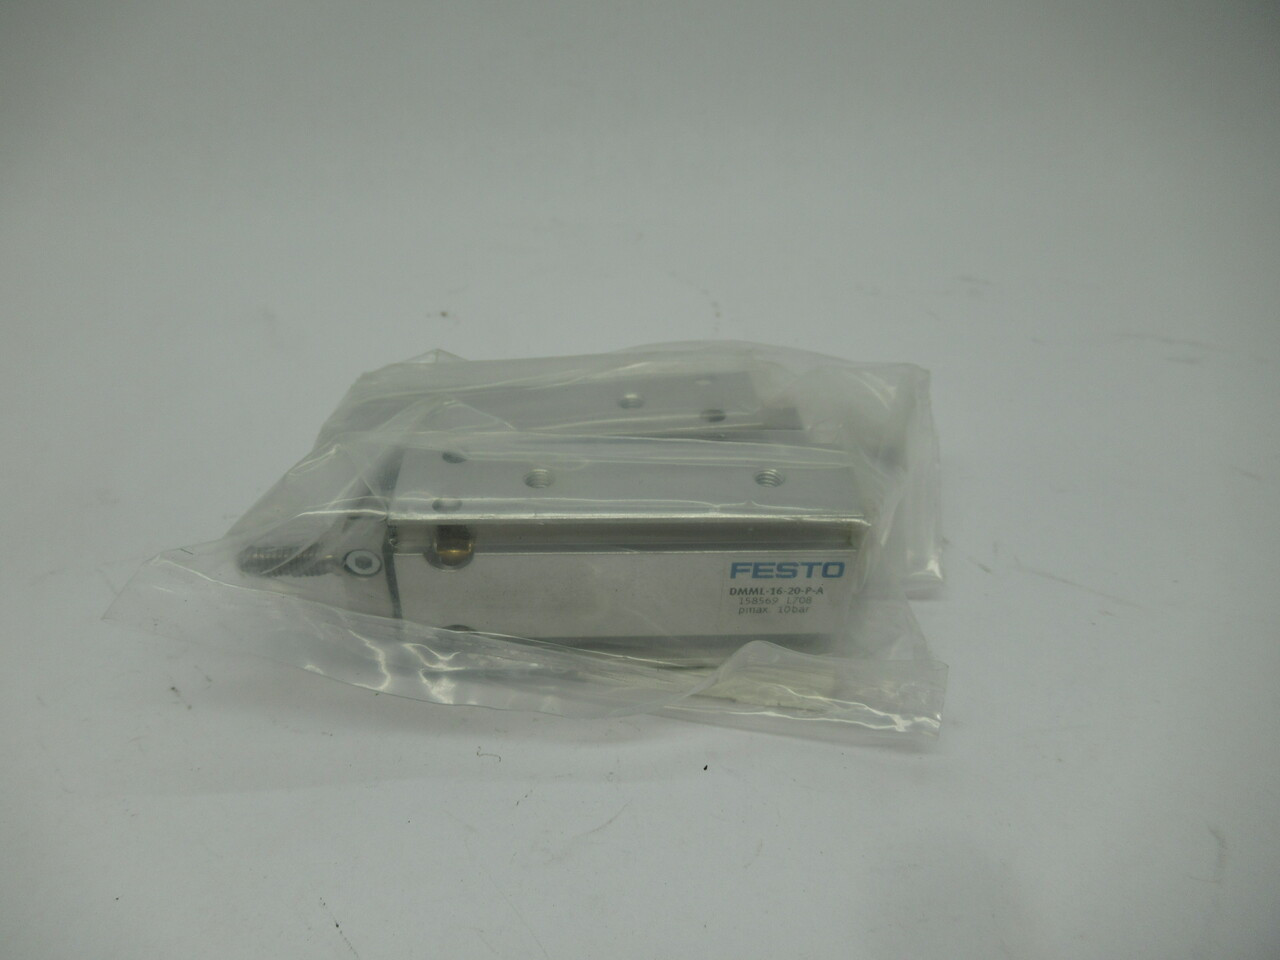 Festo 158569 DMML-16-20-P-A Compact Cylinder 16mm Bore 20mm Stroke Lot of 2 NWB